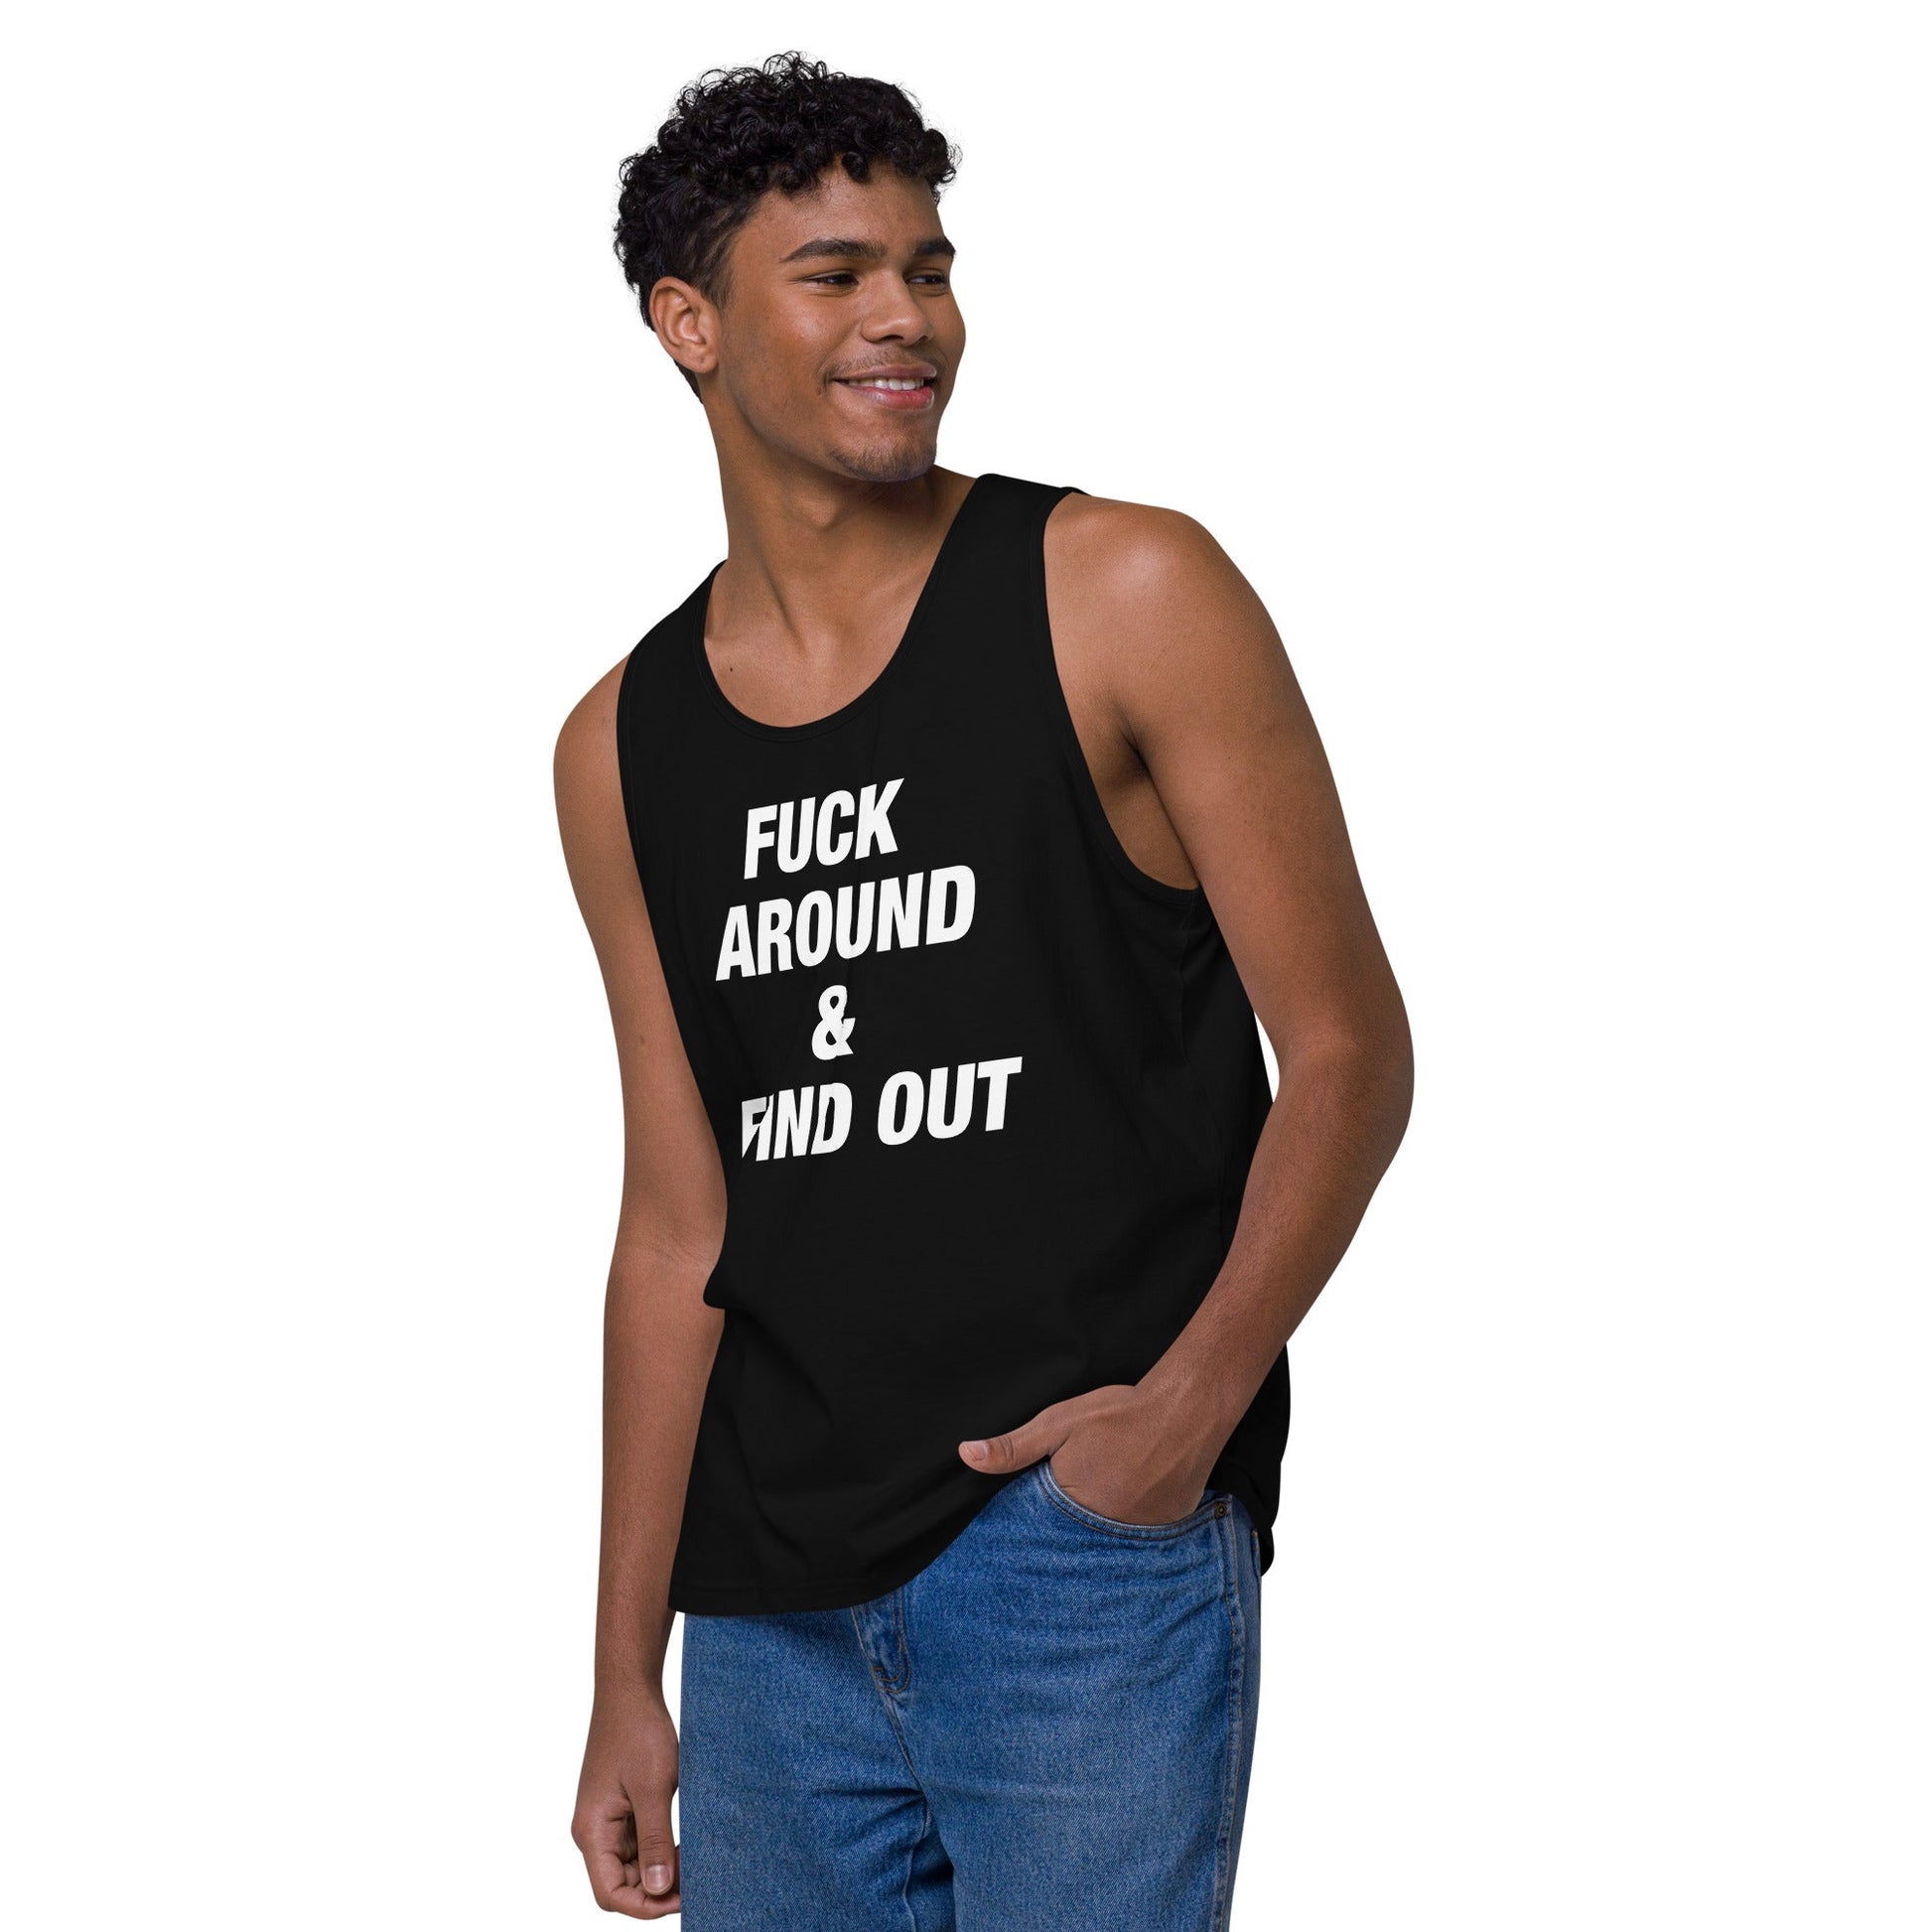 Farris Wheel "Fuck Around and Find Out" Men’s Premium Tank Top - BeExtra! Apparel & More